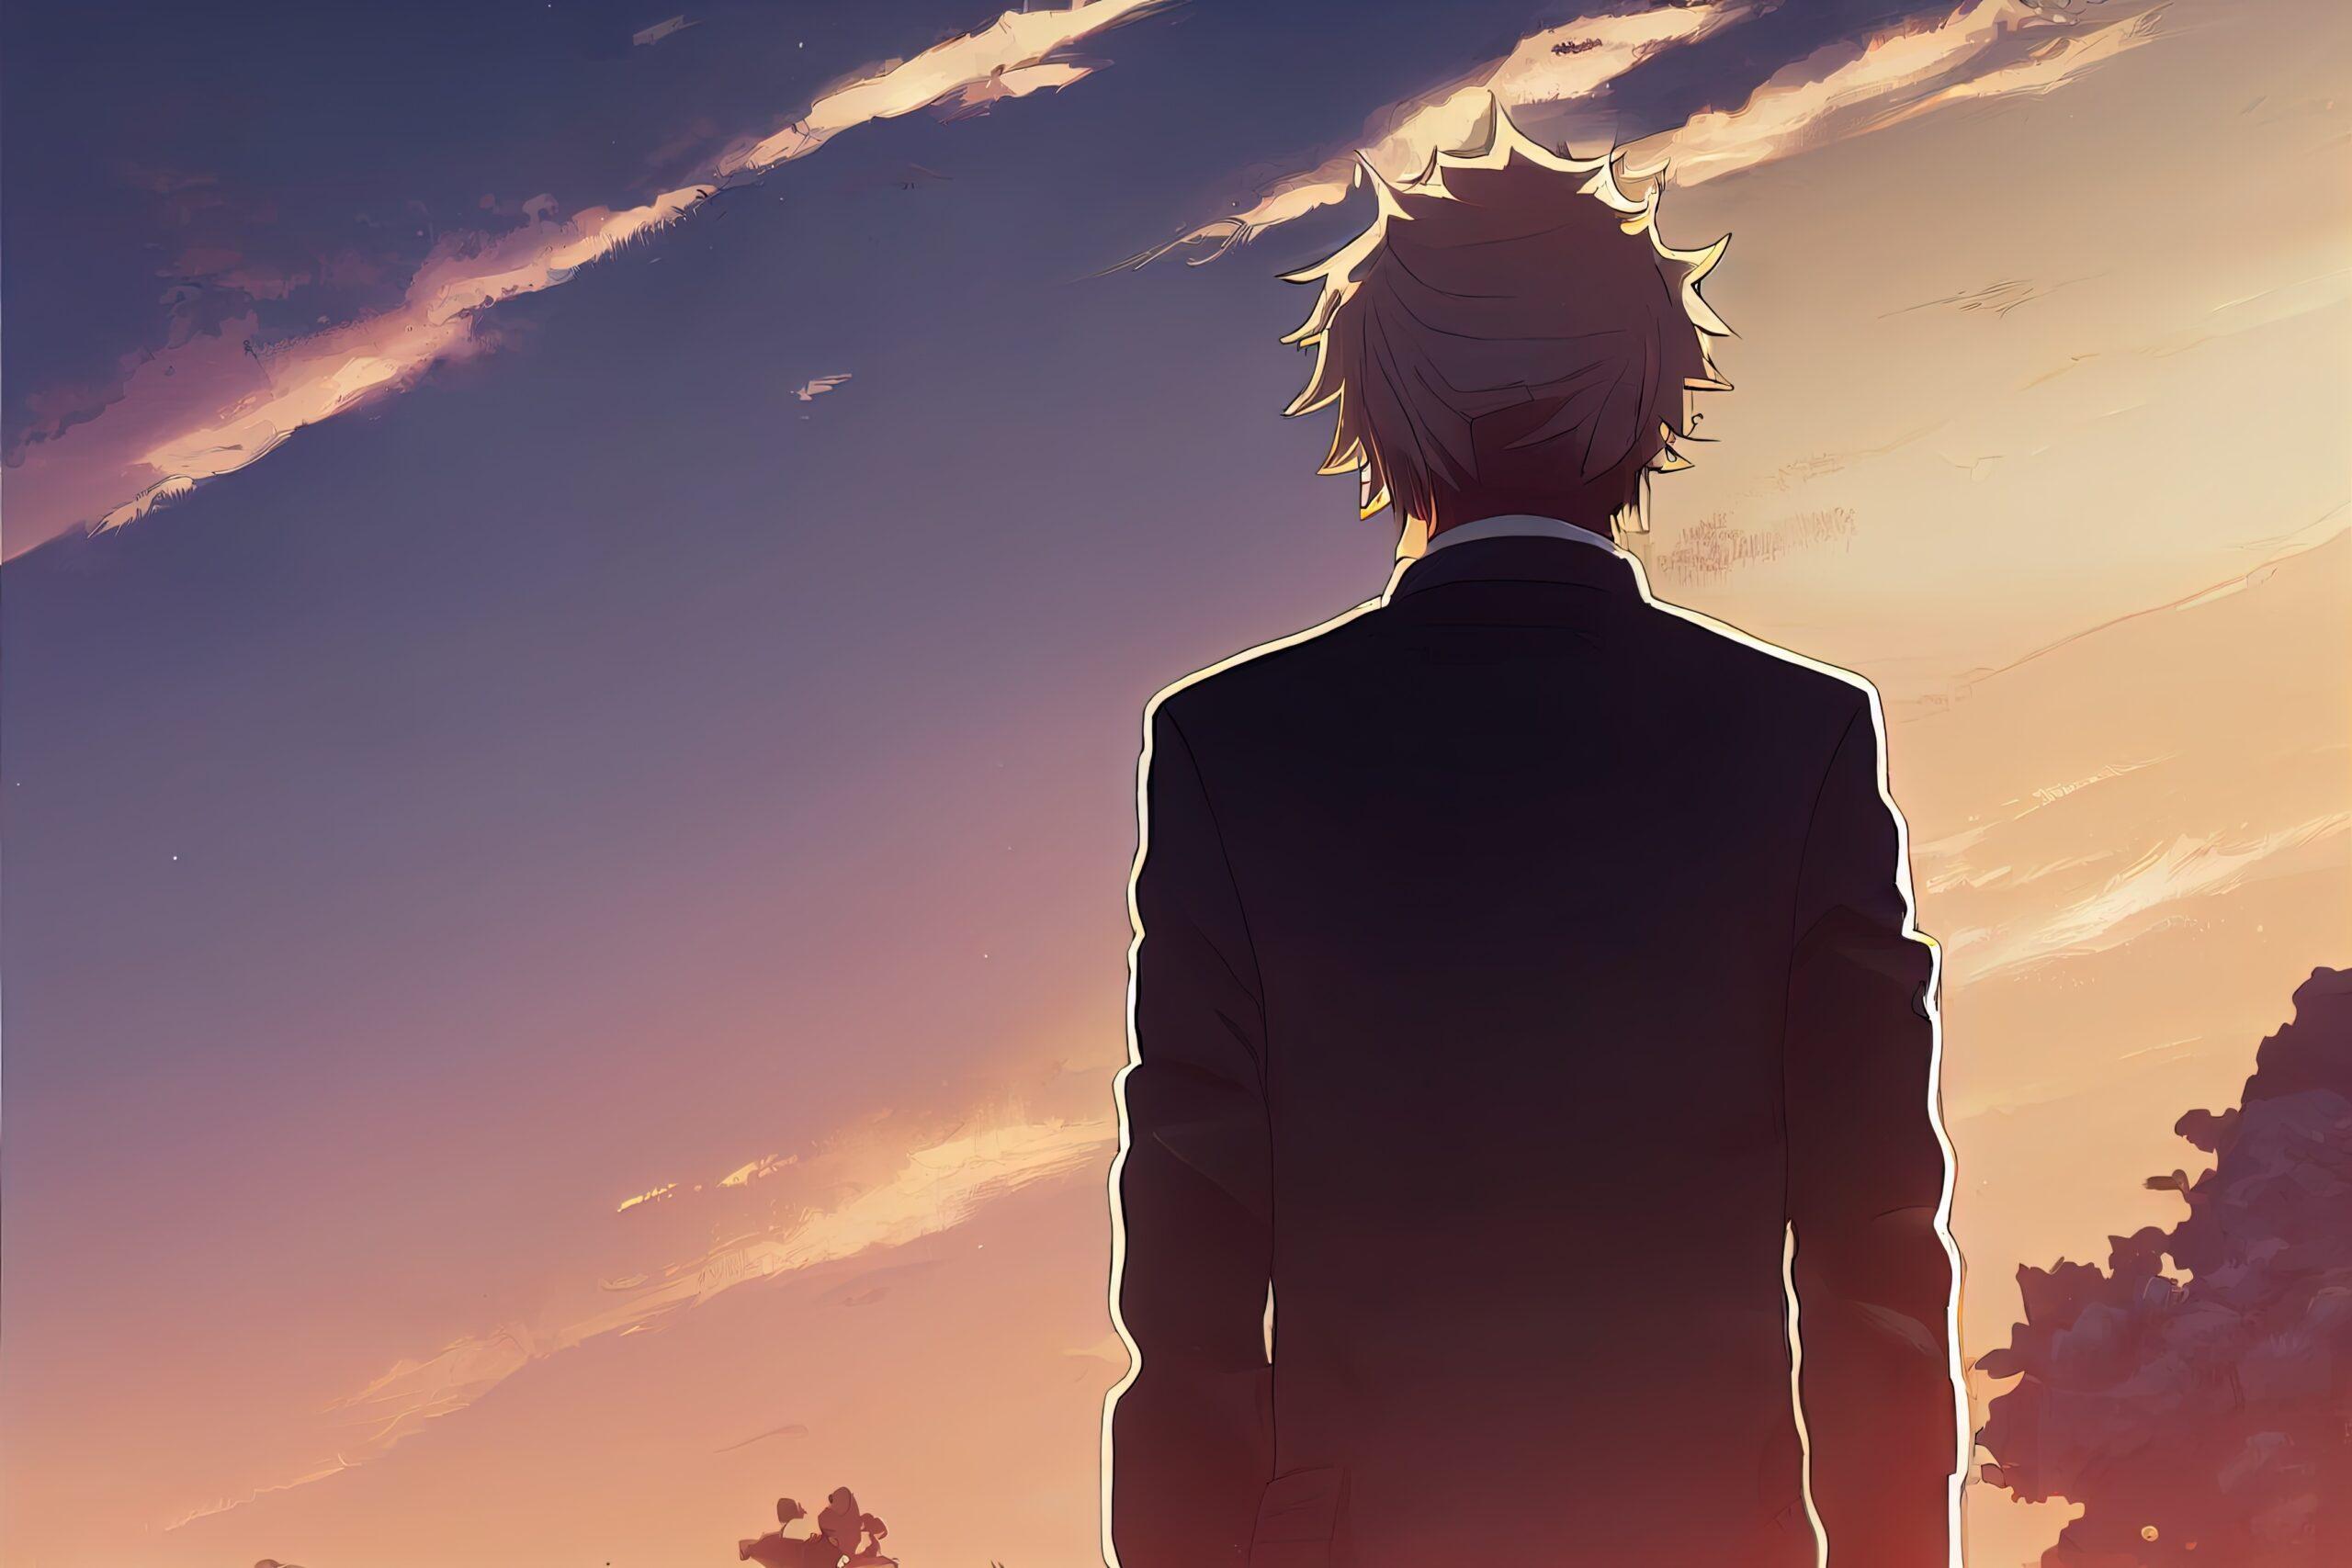 Anime man looking in the distance at sunset. Manga style digital